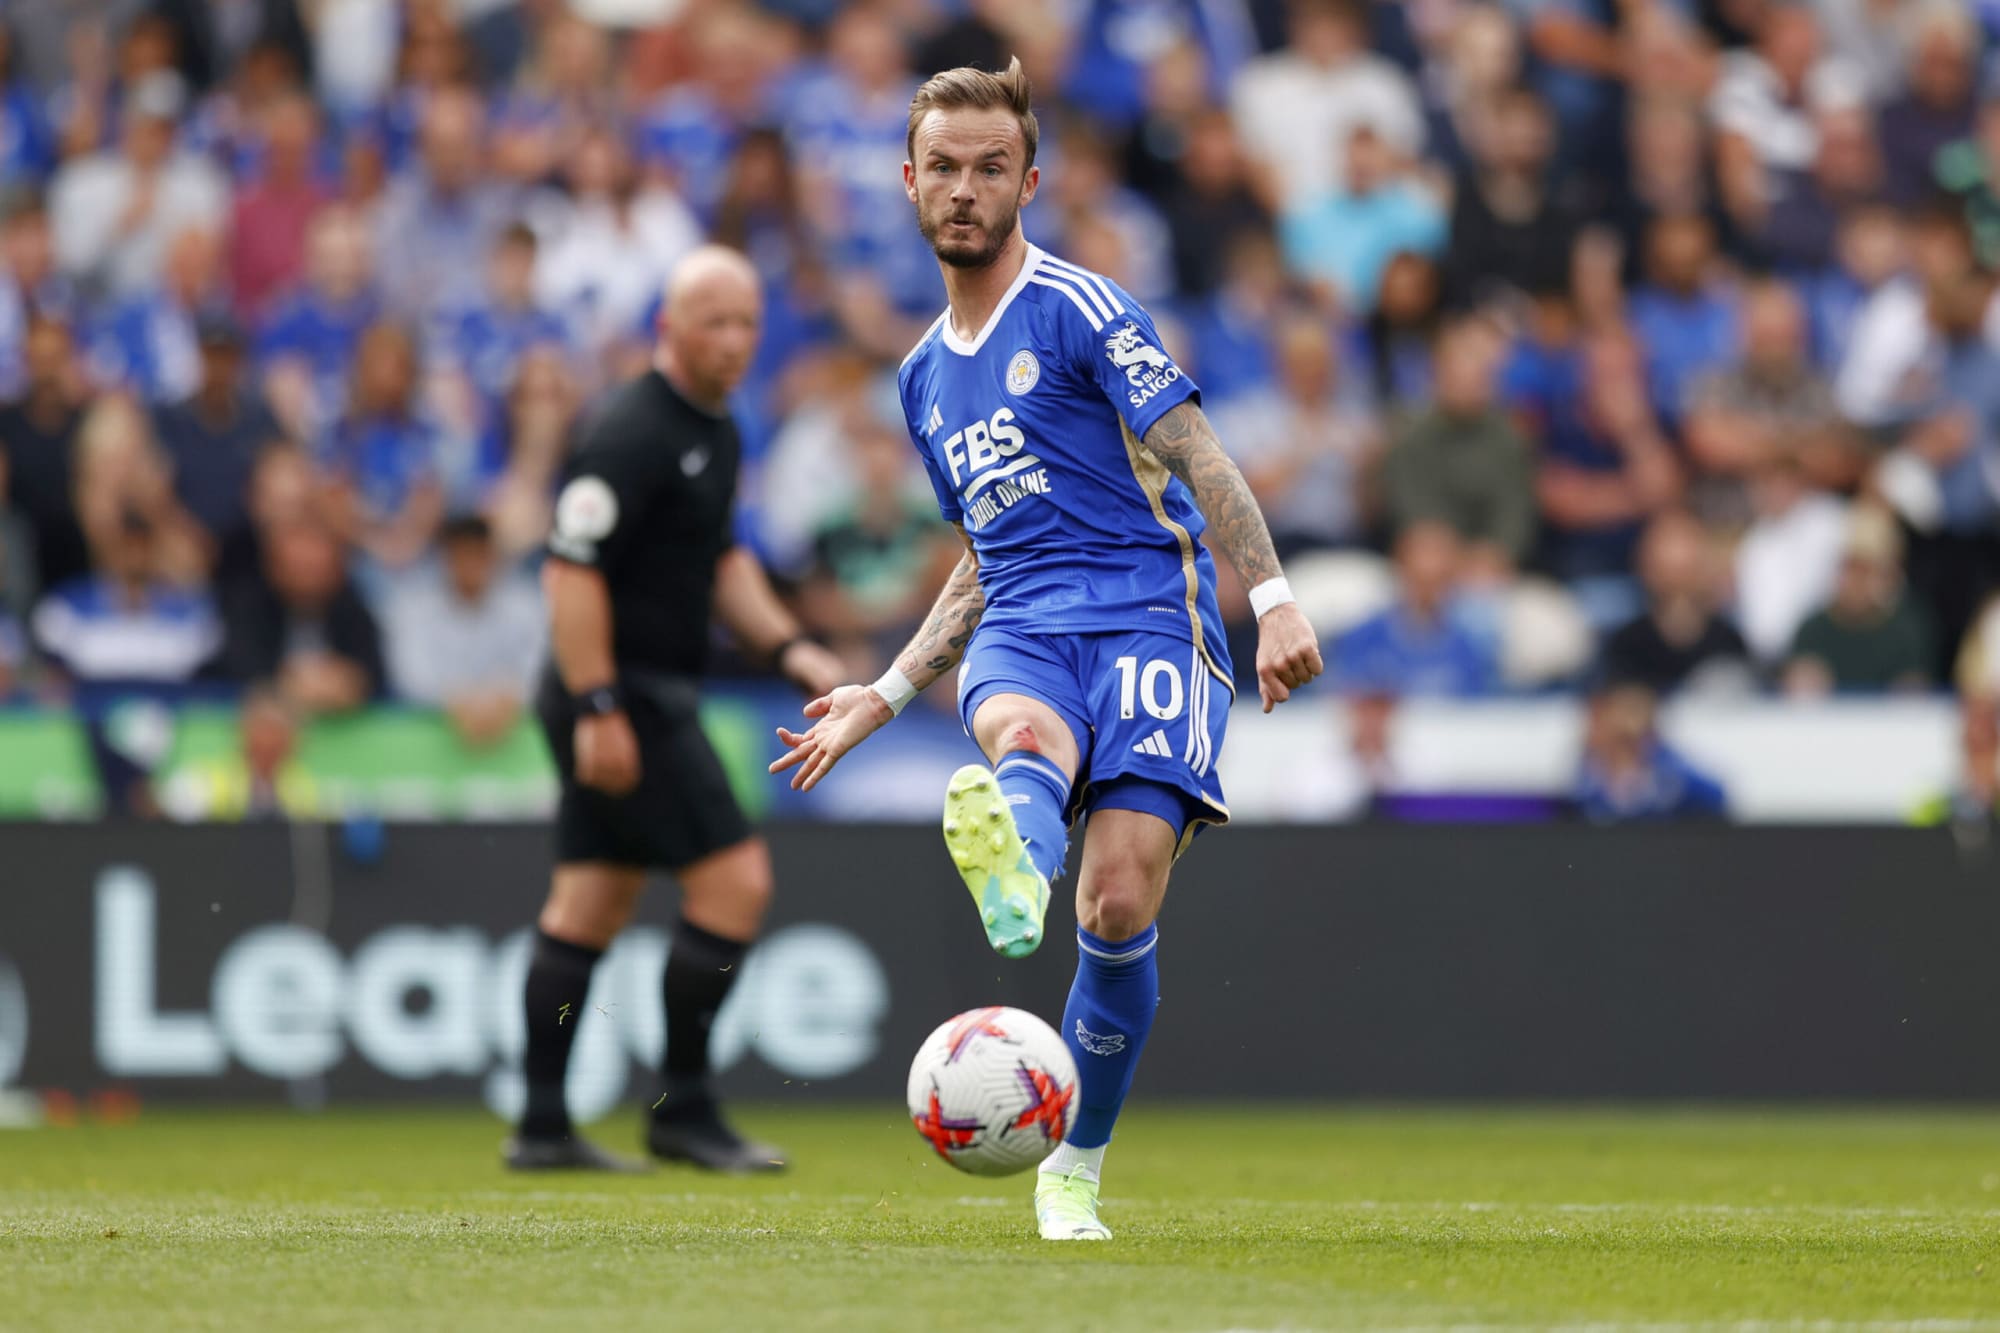 Newcastle United targets Leicester City’s James Maddison